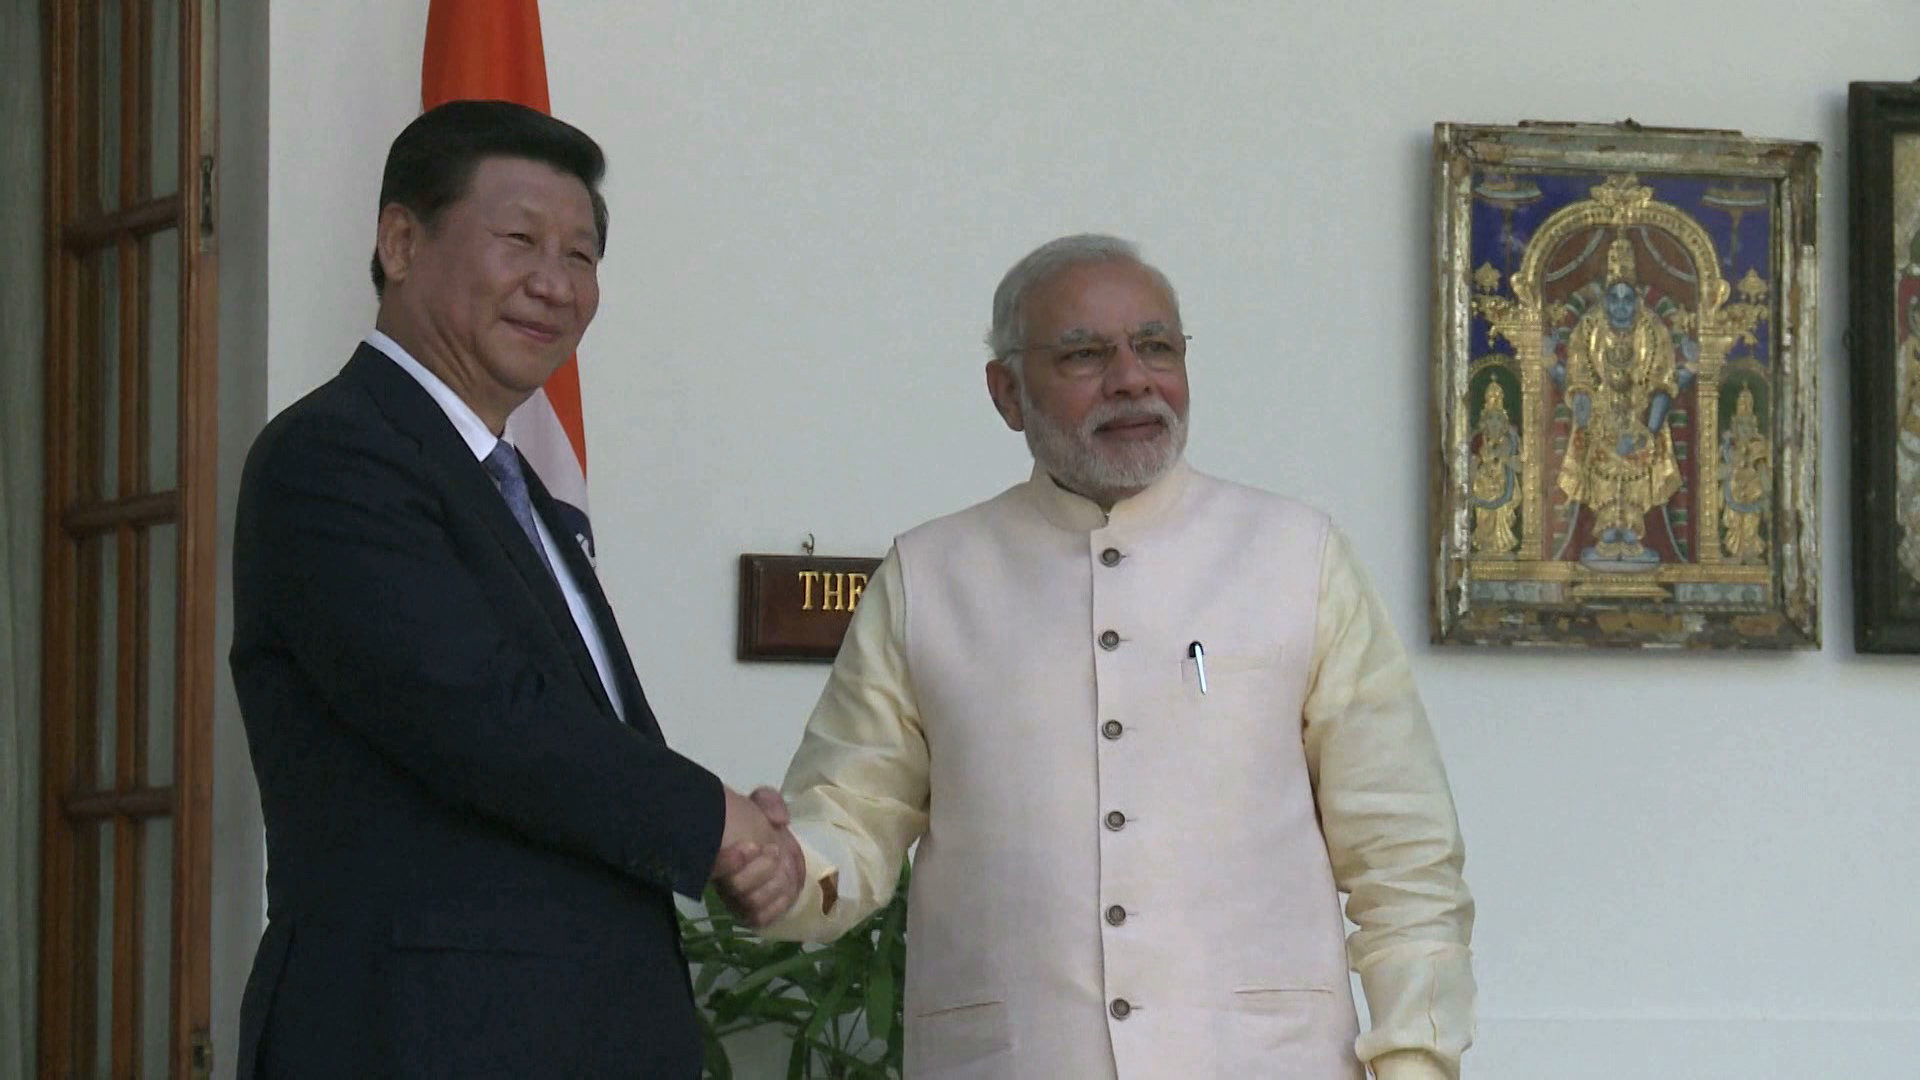 The Heat: The future of India and China relationship